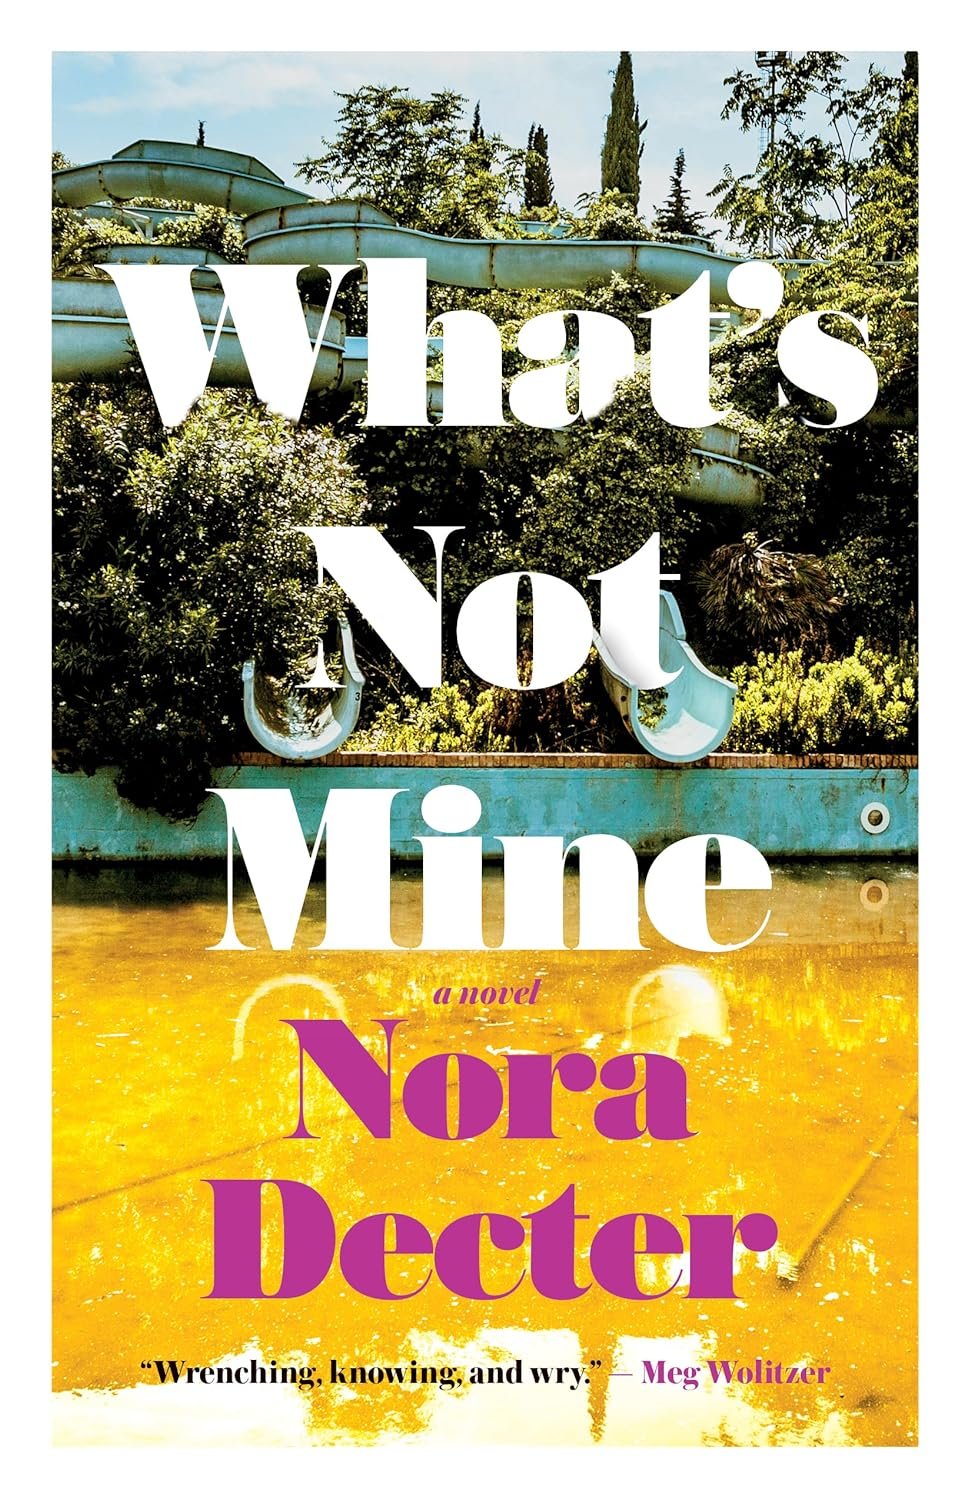 Dector, Nora - What's Not Mine - cover.jpg